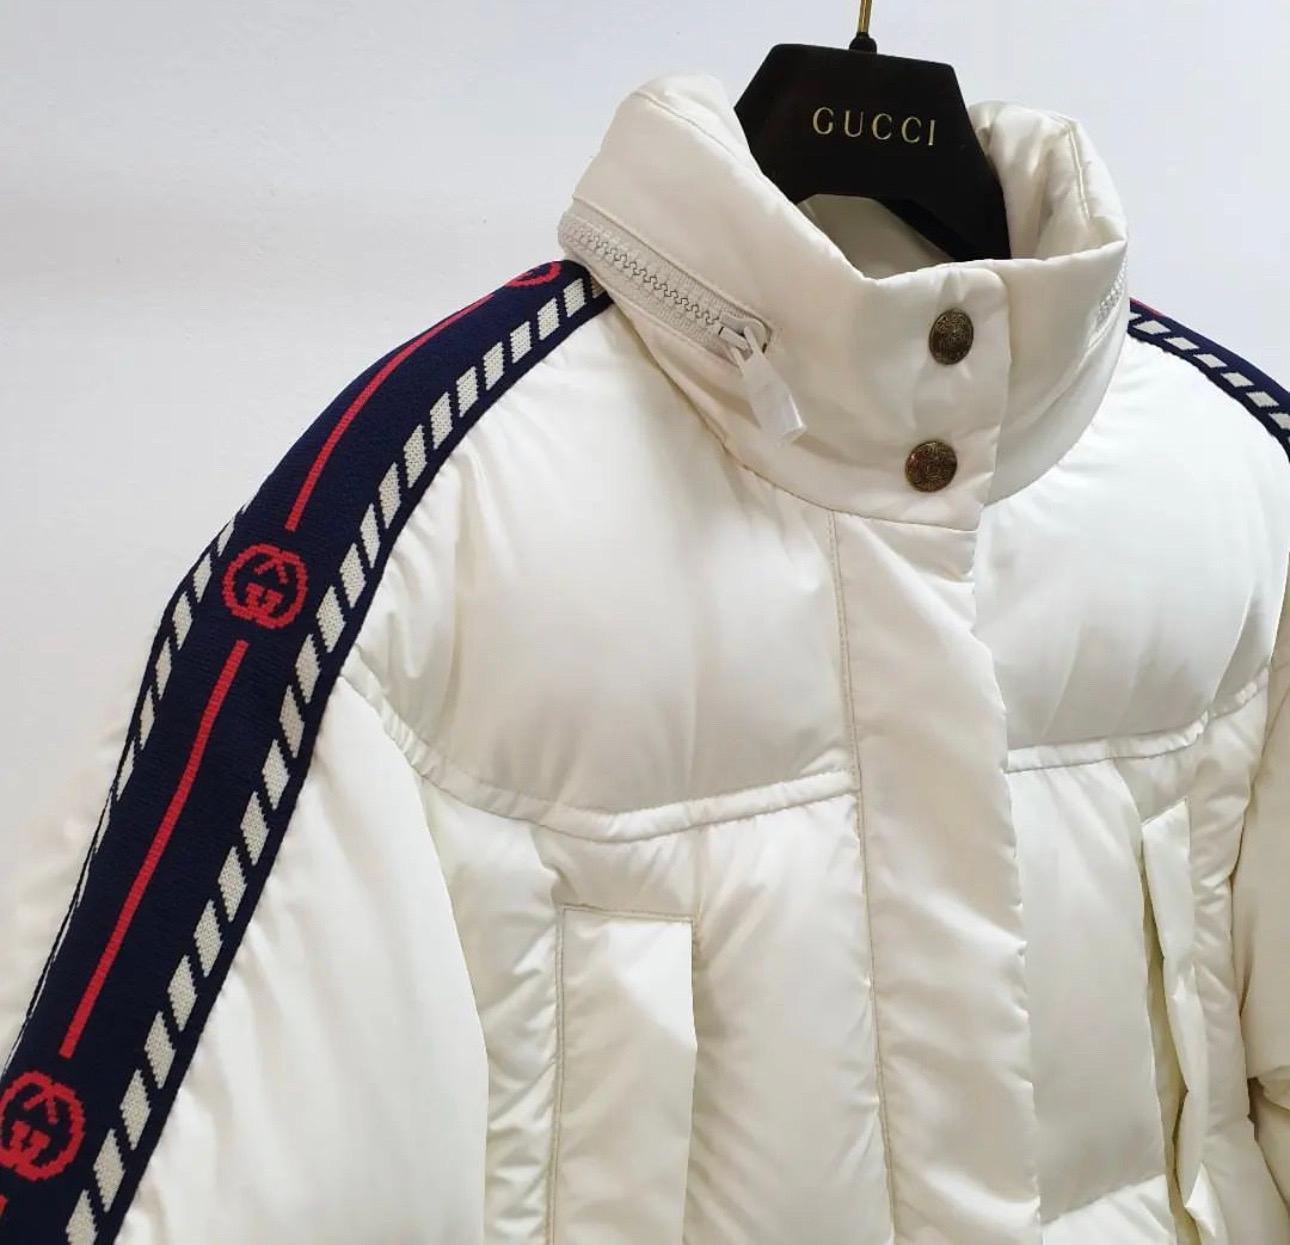 Web detailing down the sleeves of this white padded jacket give it the signature Gucci flair. The high neck will ensure you're kept cosy as winter kicks in. 
Featuring a stand up collar, a snap fastening, long sleeves, front flap pockets and GG thin